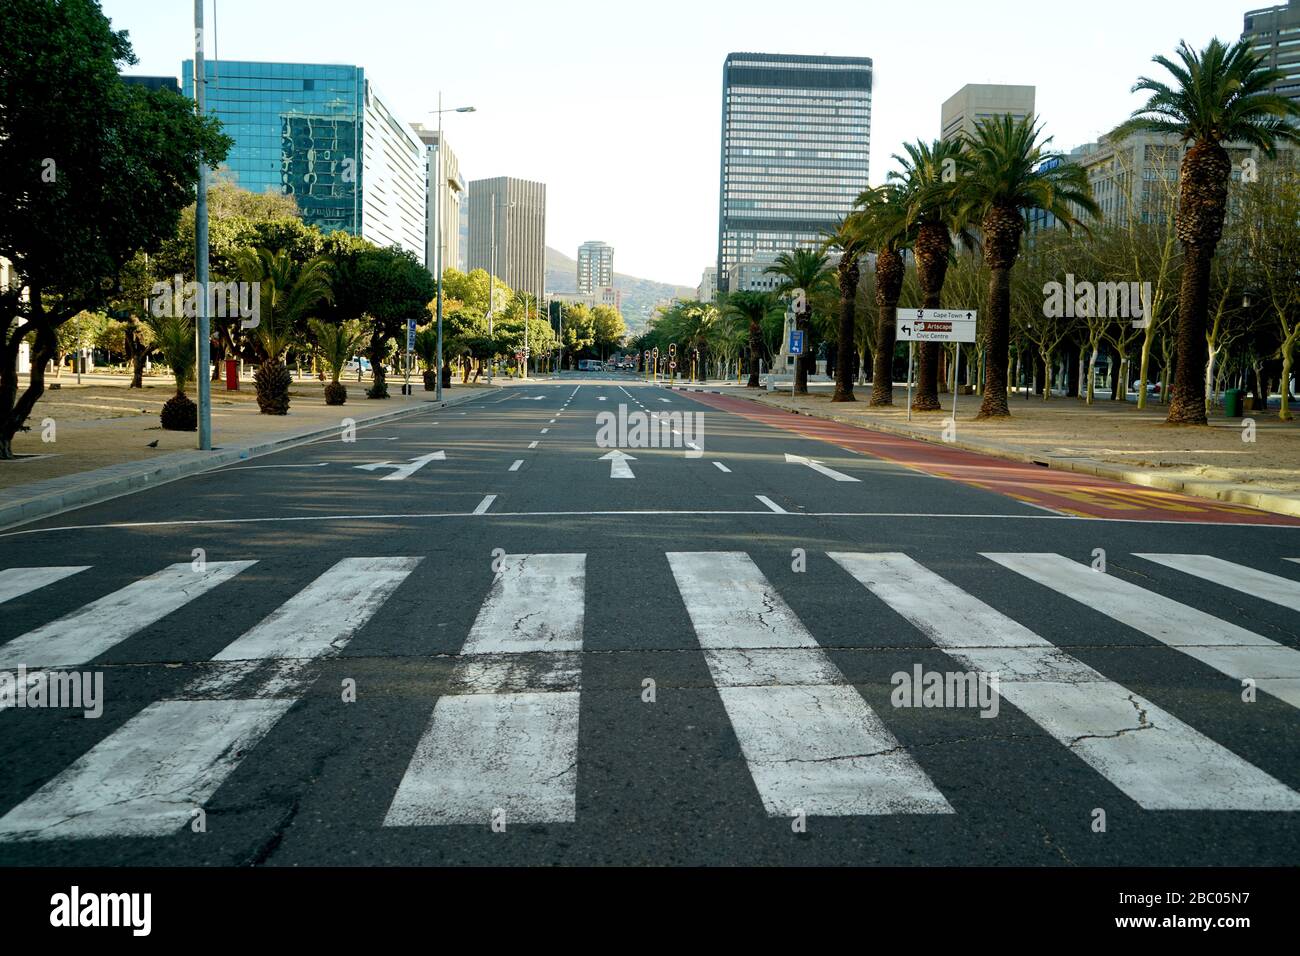 2 April 2020 - Cape Town,South Africa : Empty streets in the city of Cape Town during the lockdown for Covid-19 Stock Photo